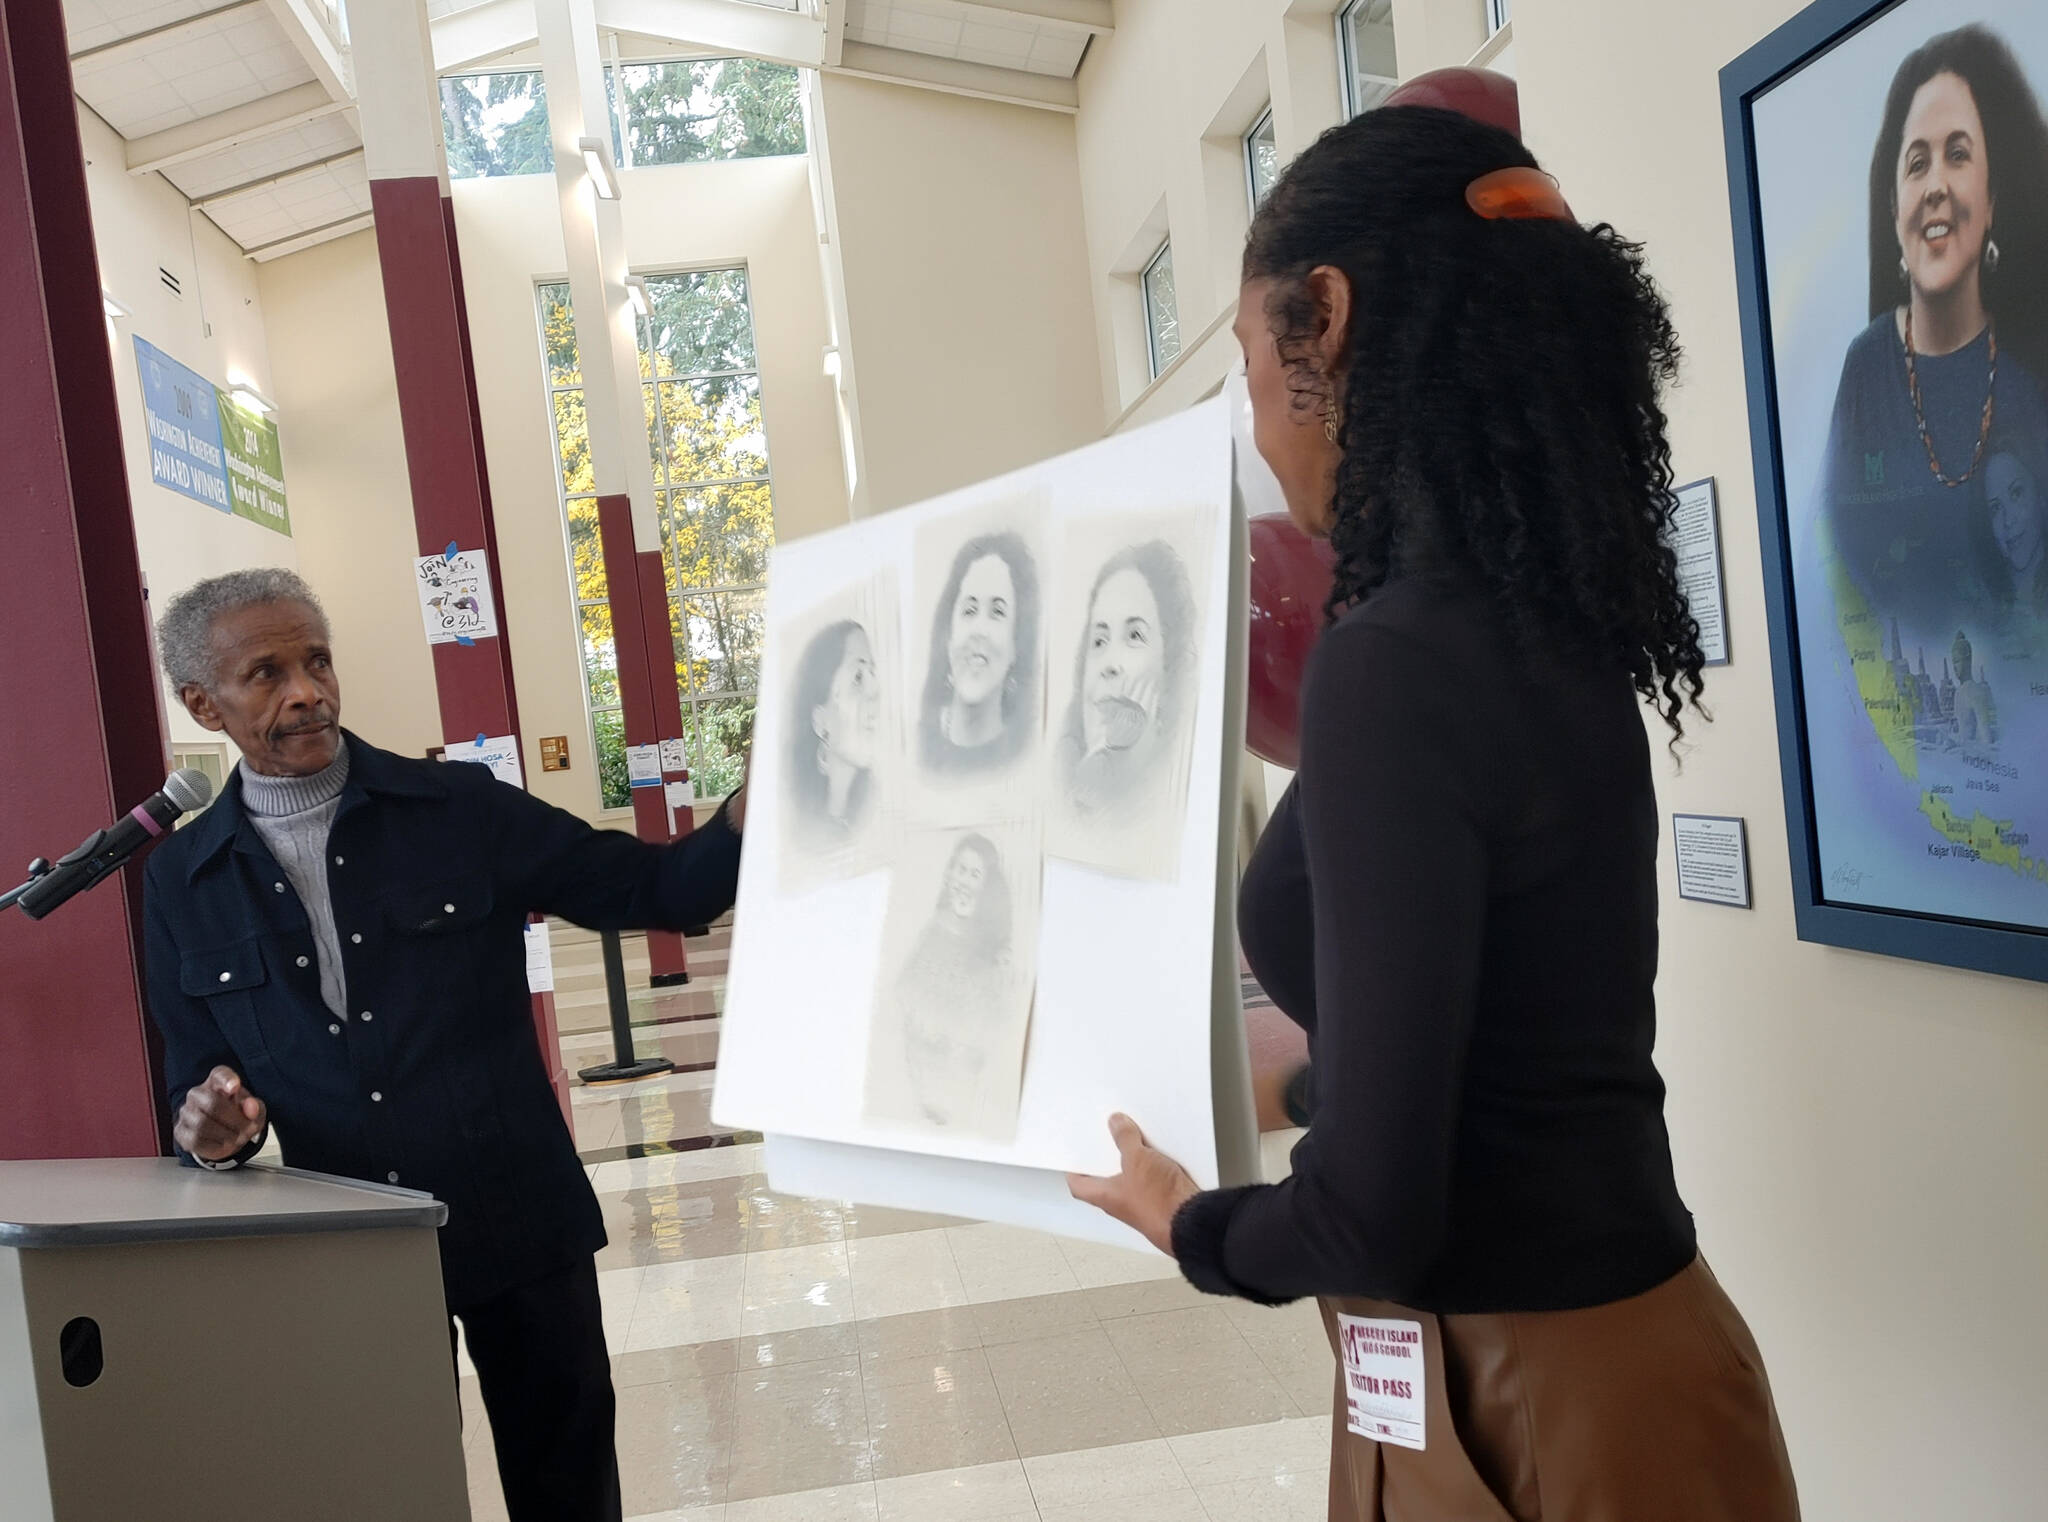 Artist Al Doggett is joined by Michelle Flowers-Taylor, board chair of the Stanley Ann Dunham Scholarship Fund, on Nov. 29 in describing his technique in drawing a portrait of Dr. Dunham that hangs (at right) in the foyer at Mercer Island High School. Andy Nystrom/ staff photo